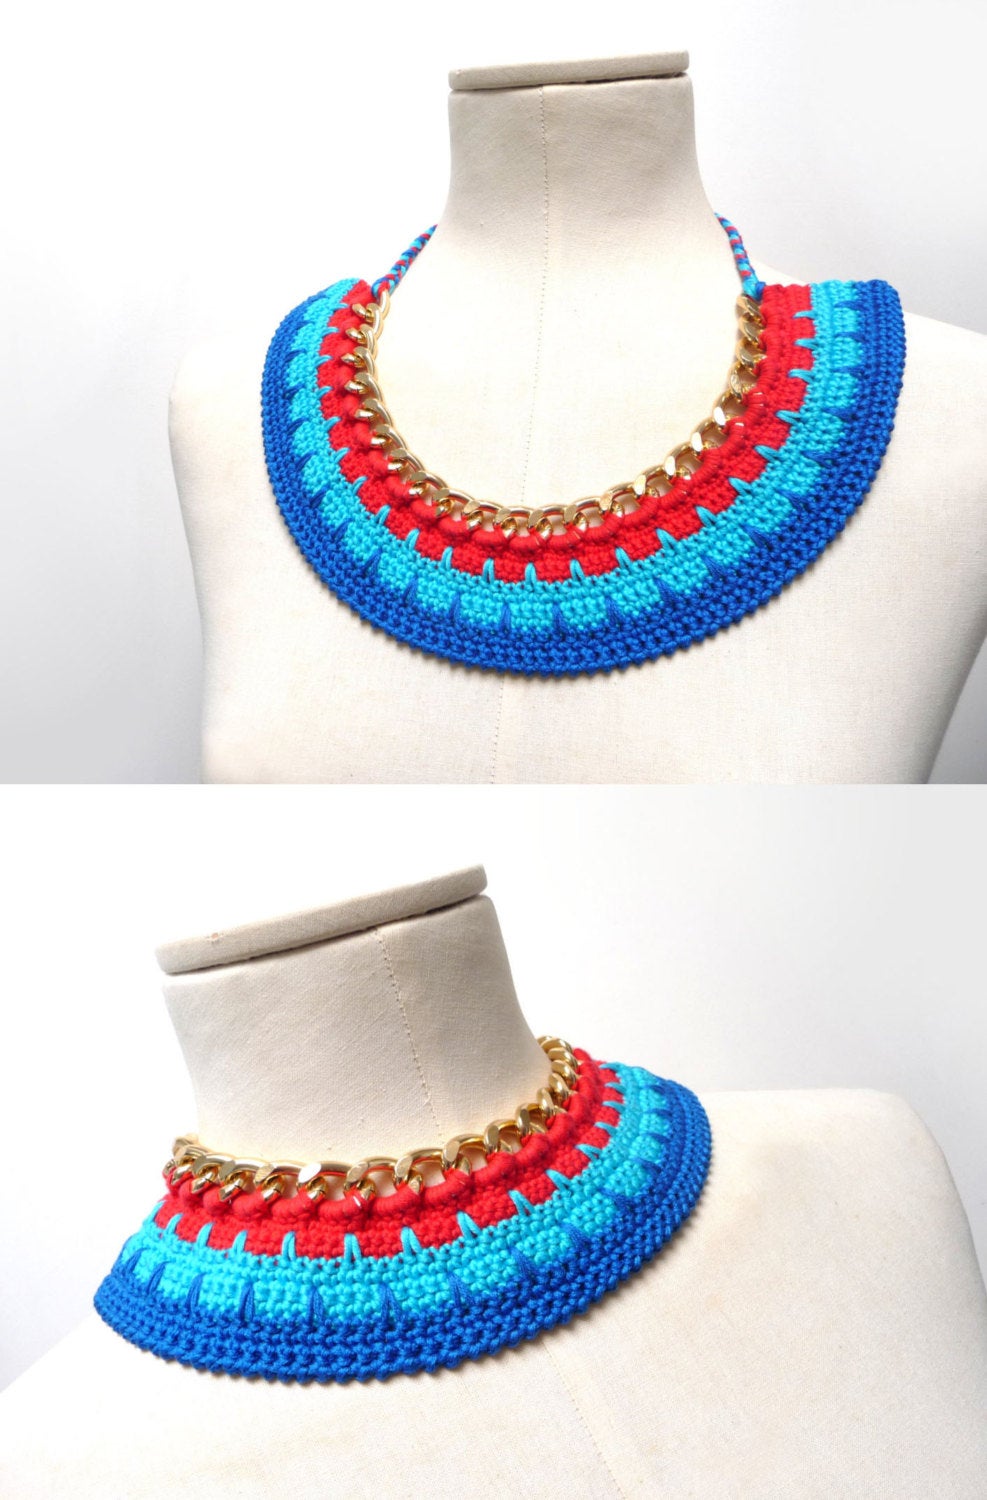 Crochet Cotton And Chain Necklace Choker - Color Block Statement Necklace - Gold Chain With Red, Turquoise, Blue Cotton